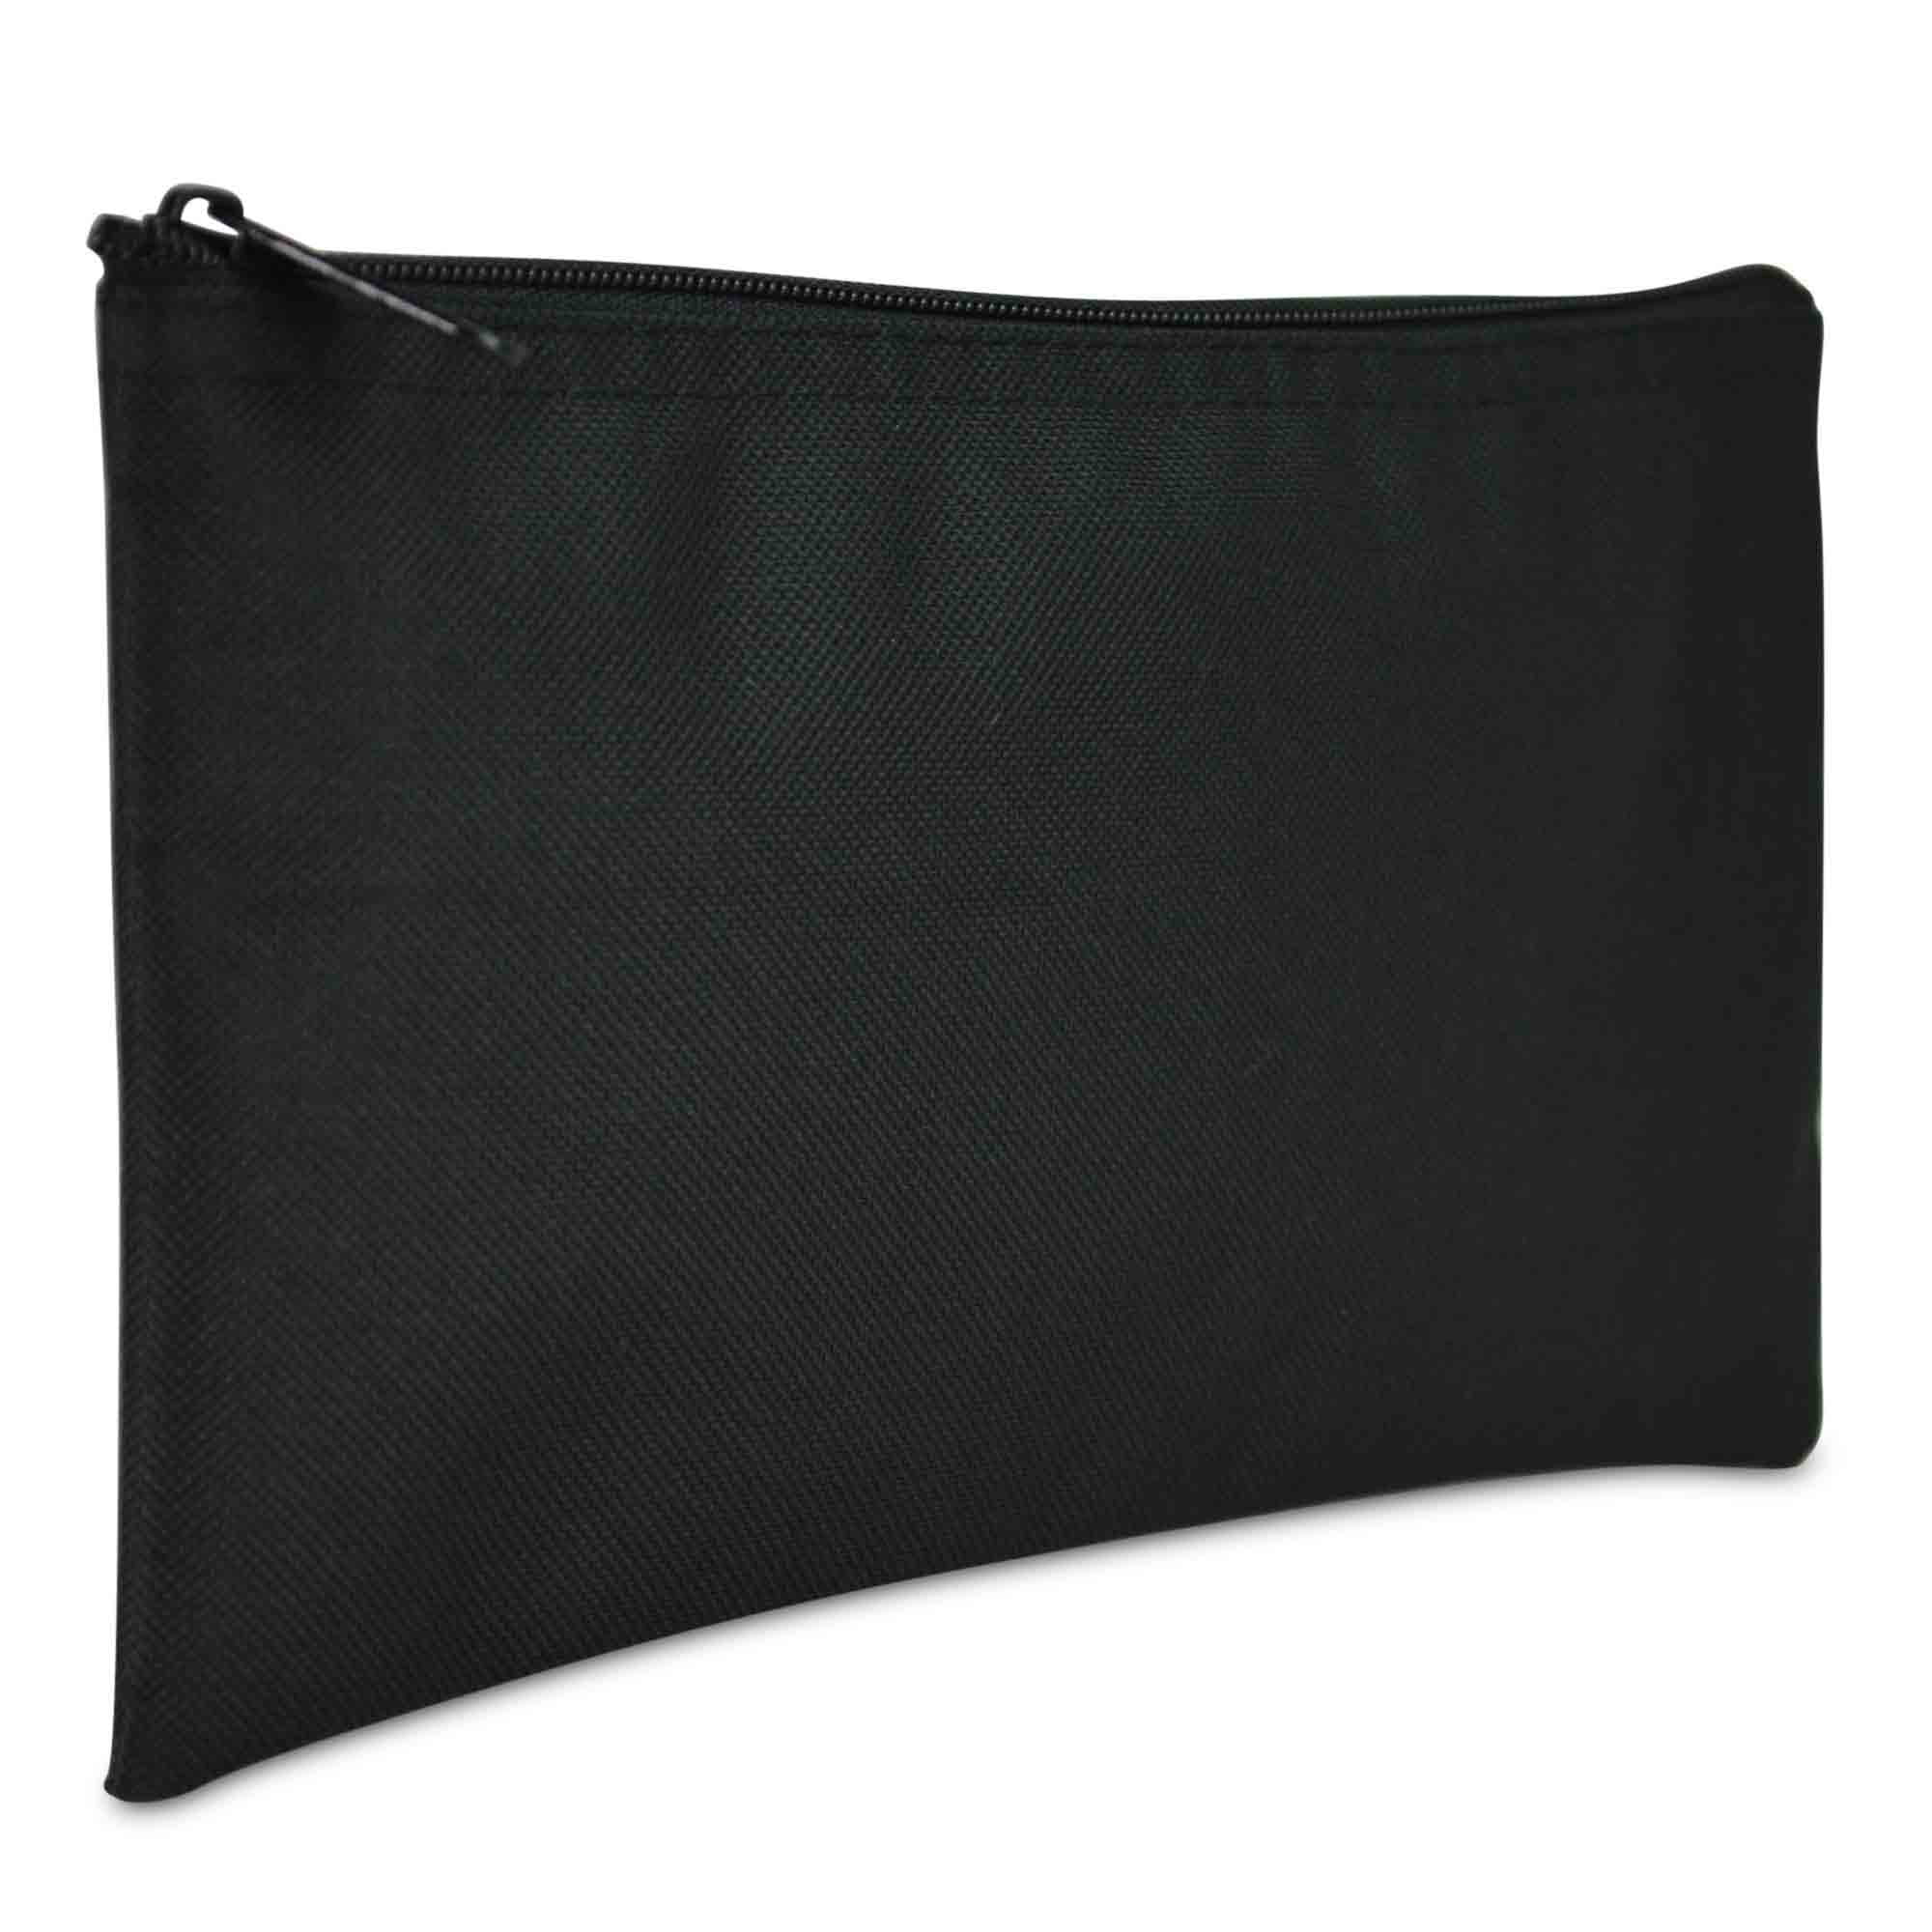 3-Piece Set PM Company Security Bank Deposit/Utility Zipper Coin Bag/Pouch Safe Money Organizer Bag Black-Polyester 11 X 5.5 Inches 